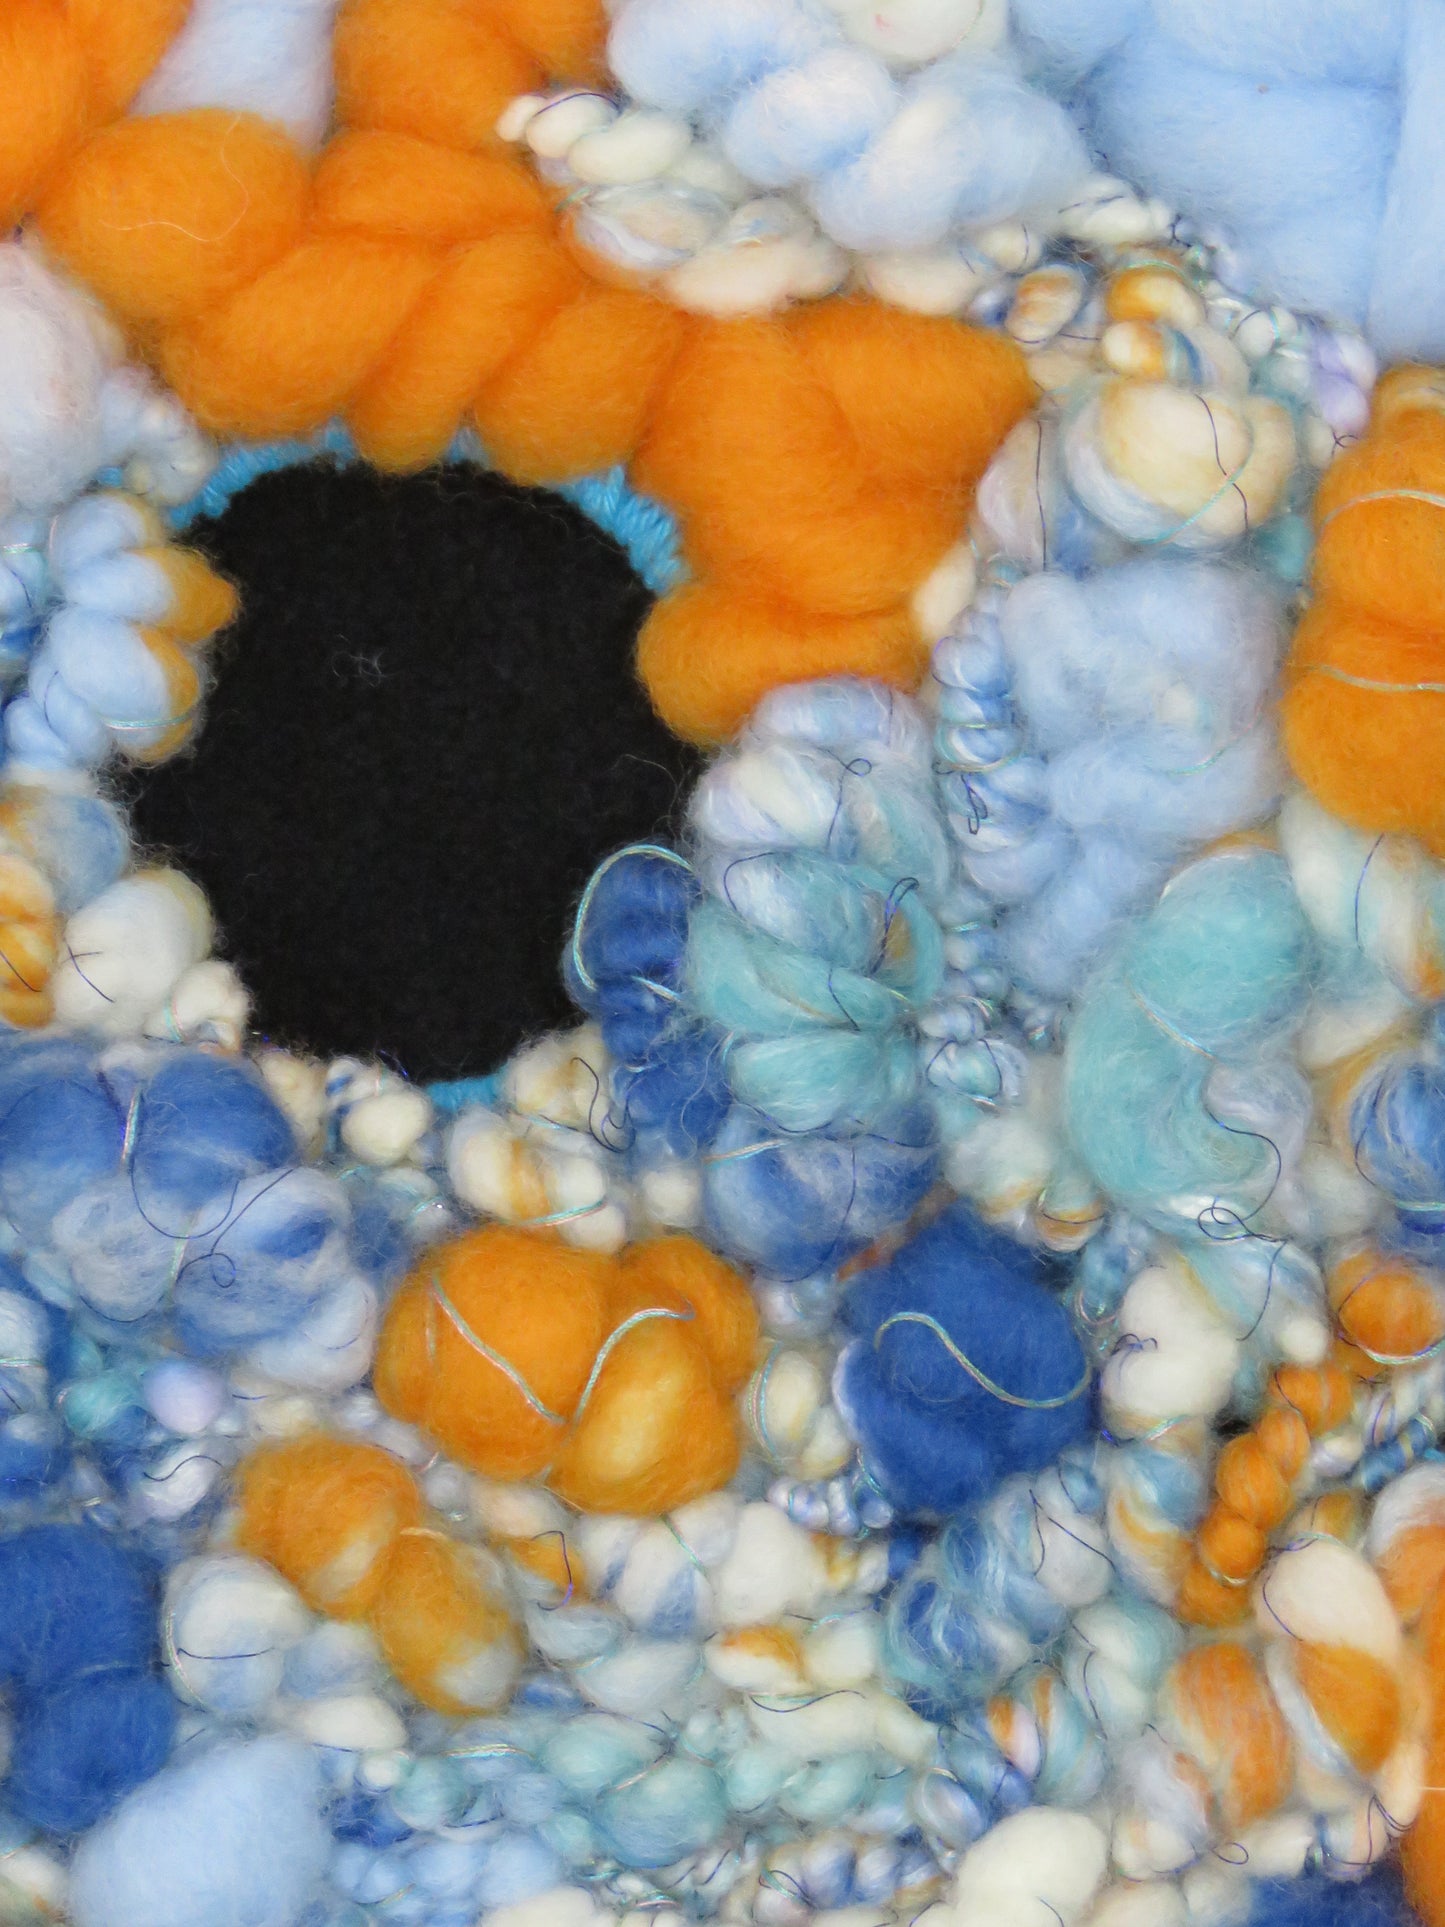 Tapestry, large, round orange and blue